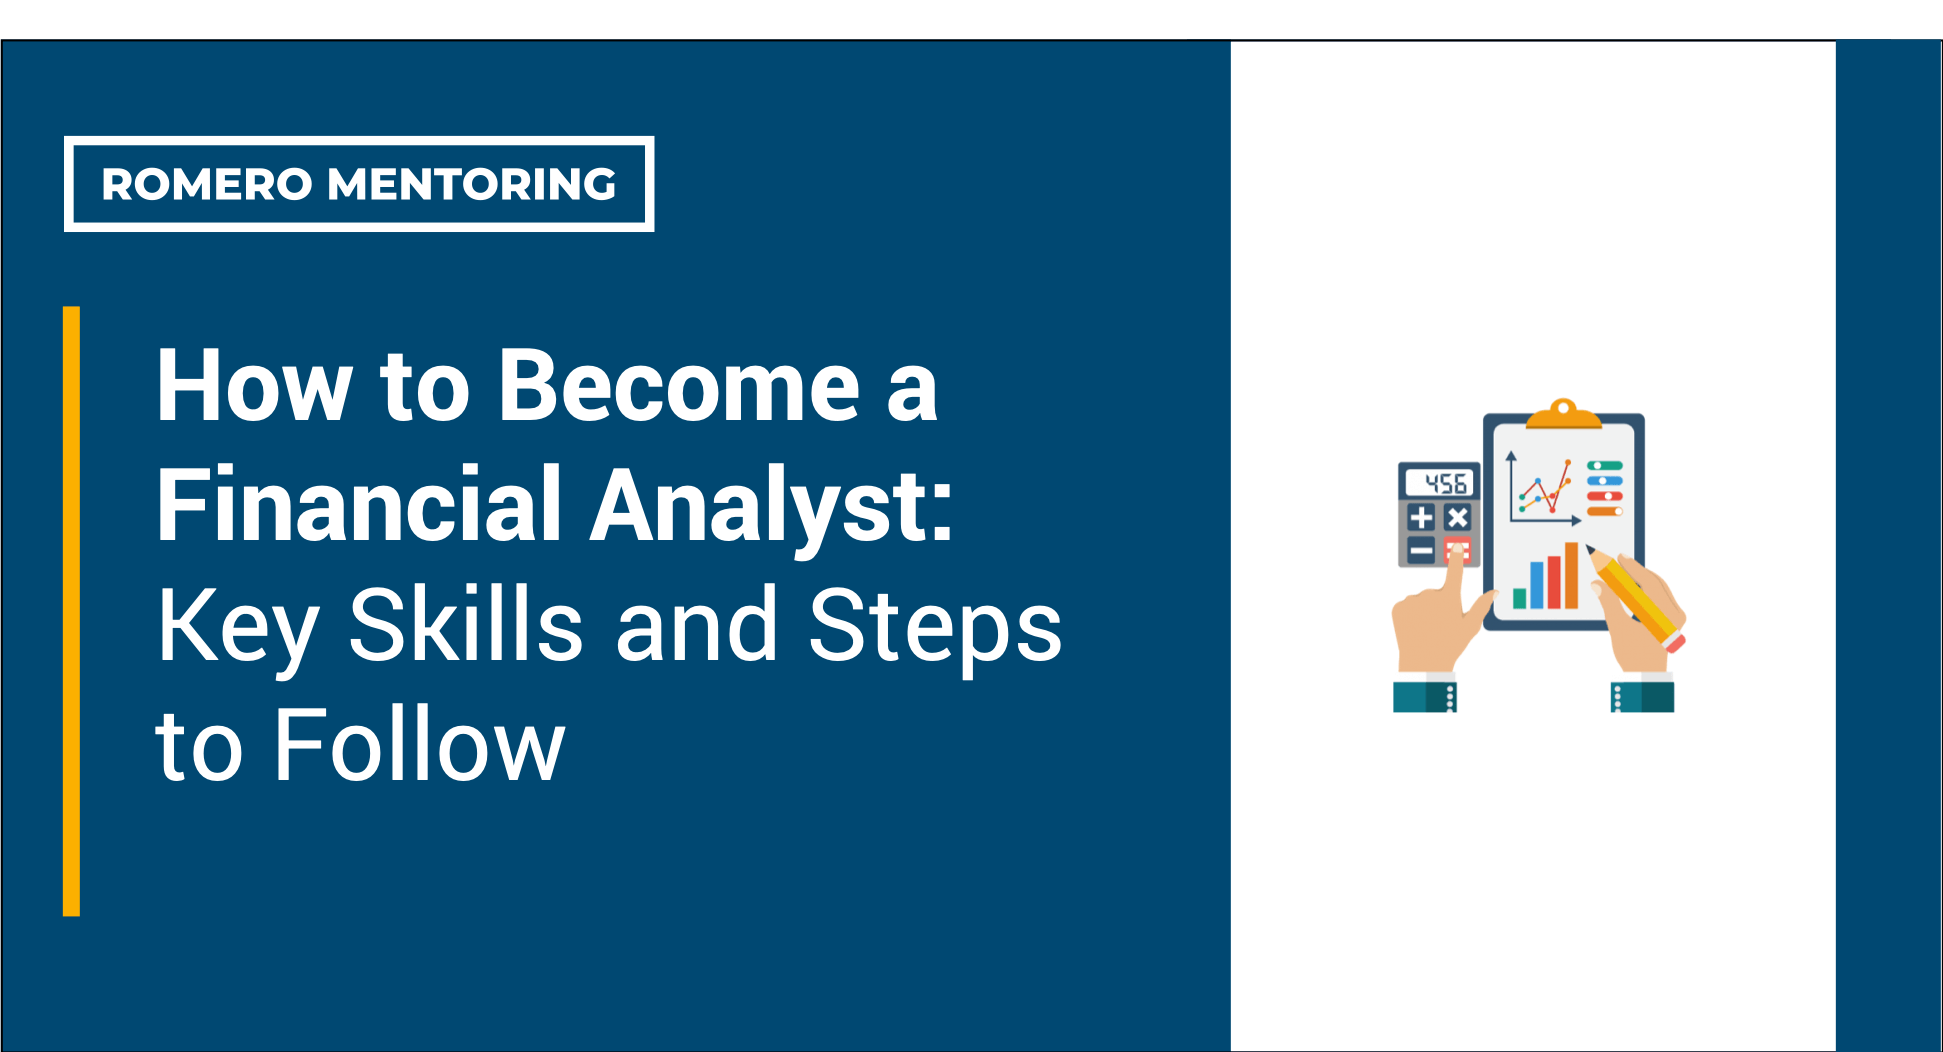 How to Become a Financial Analyst: Key Skills and Steps to Follow